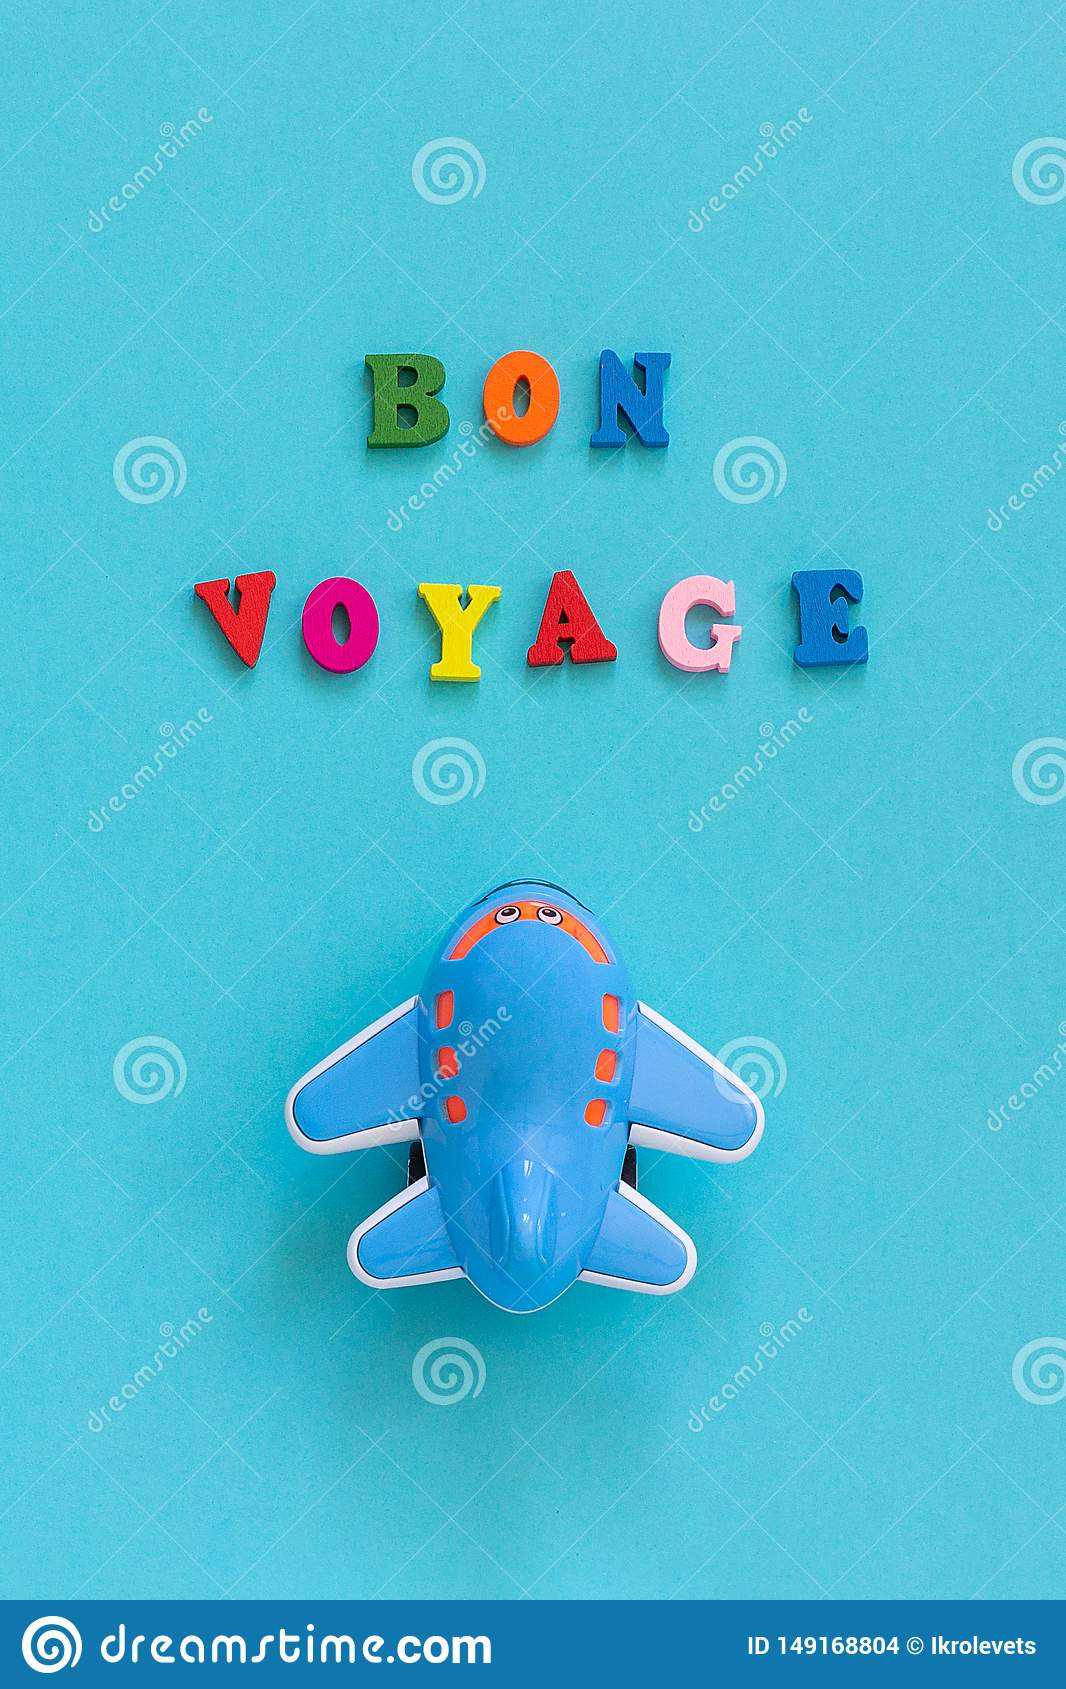 Bon Voyage Colorful Text And Children`s Funny Toy Plane On Throughout Bon Voyage Card Template